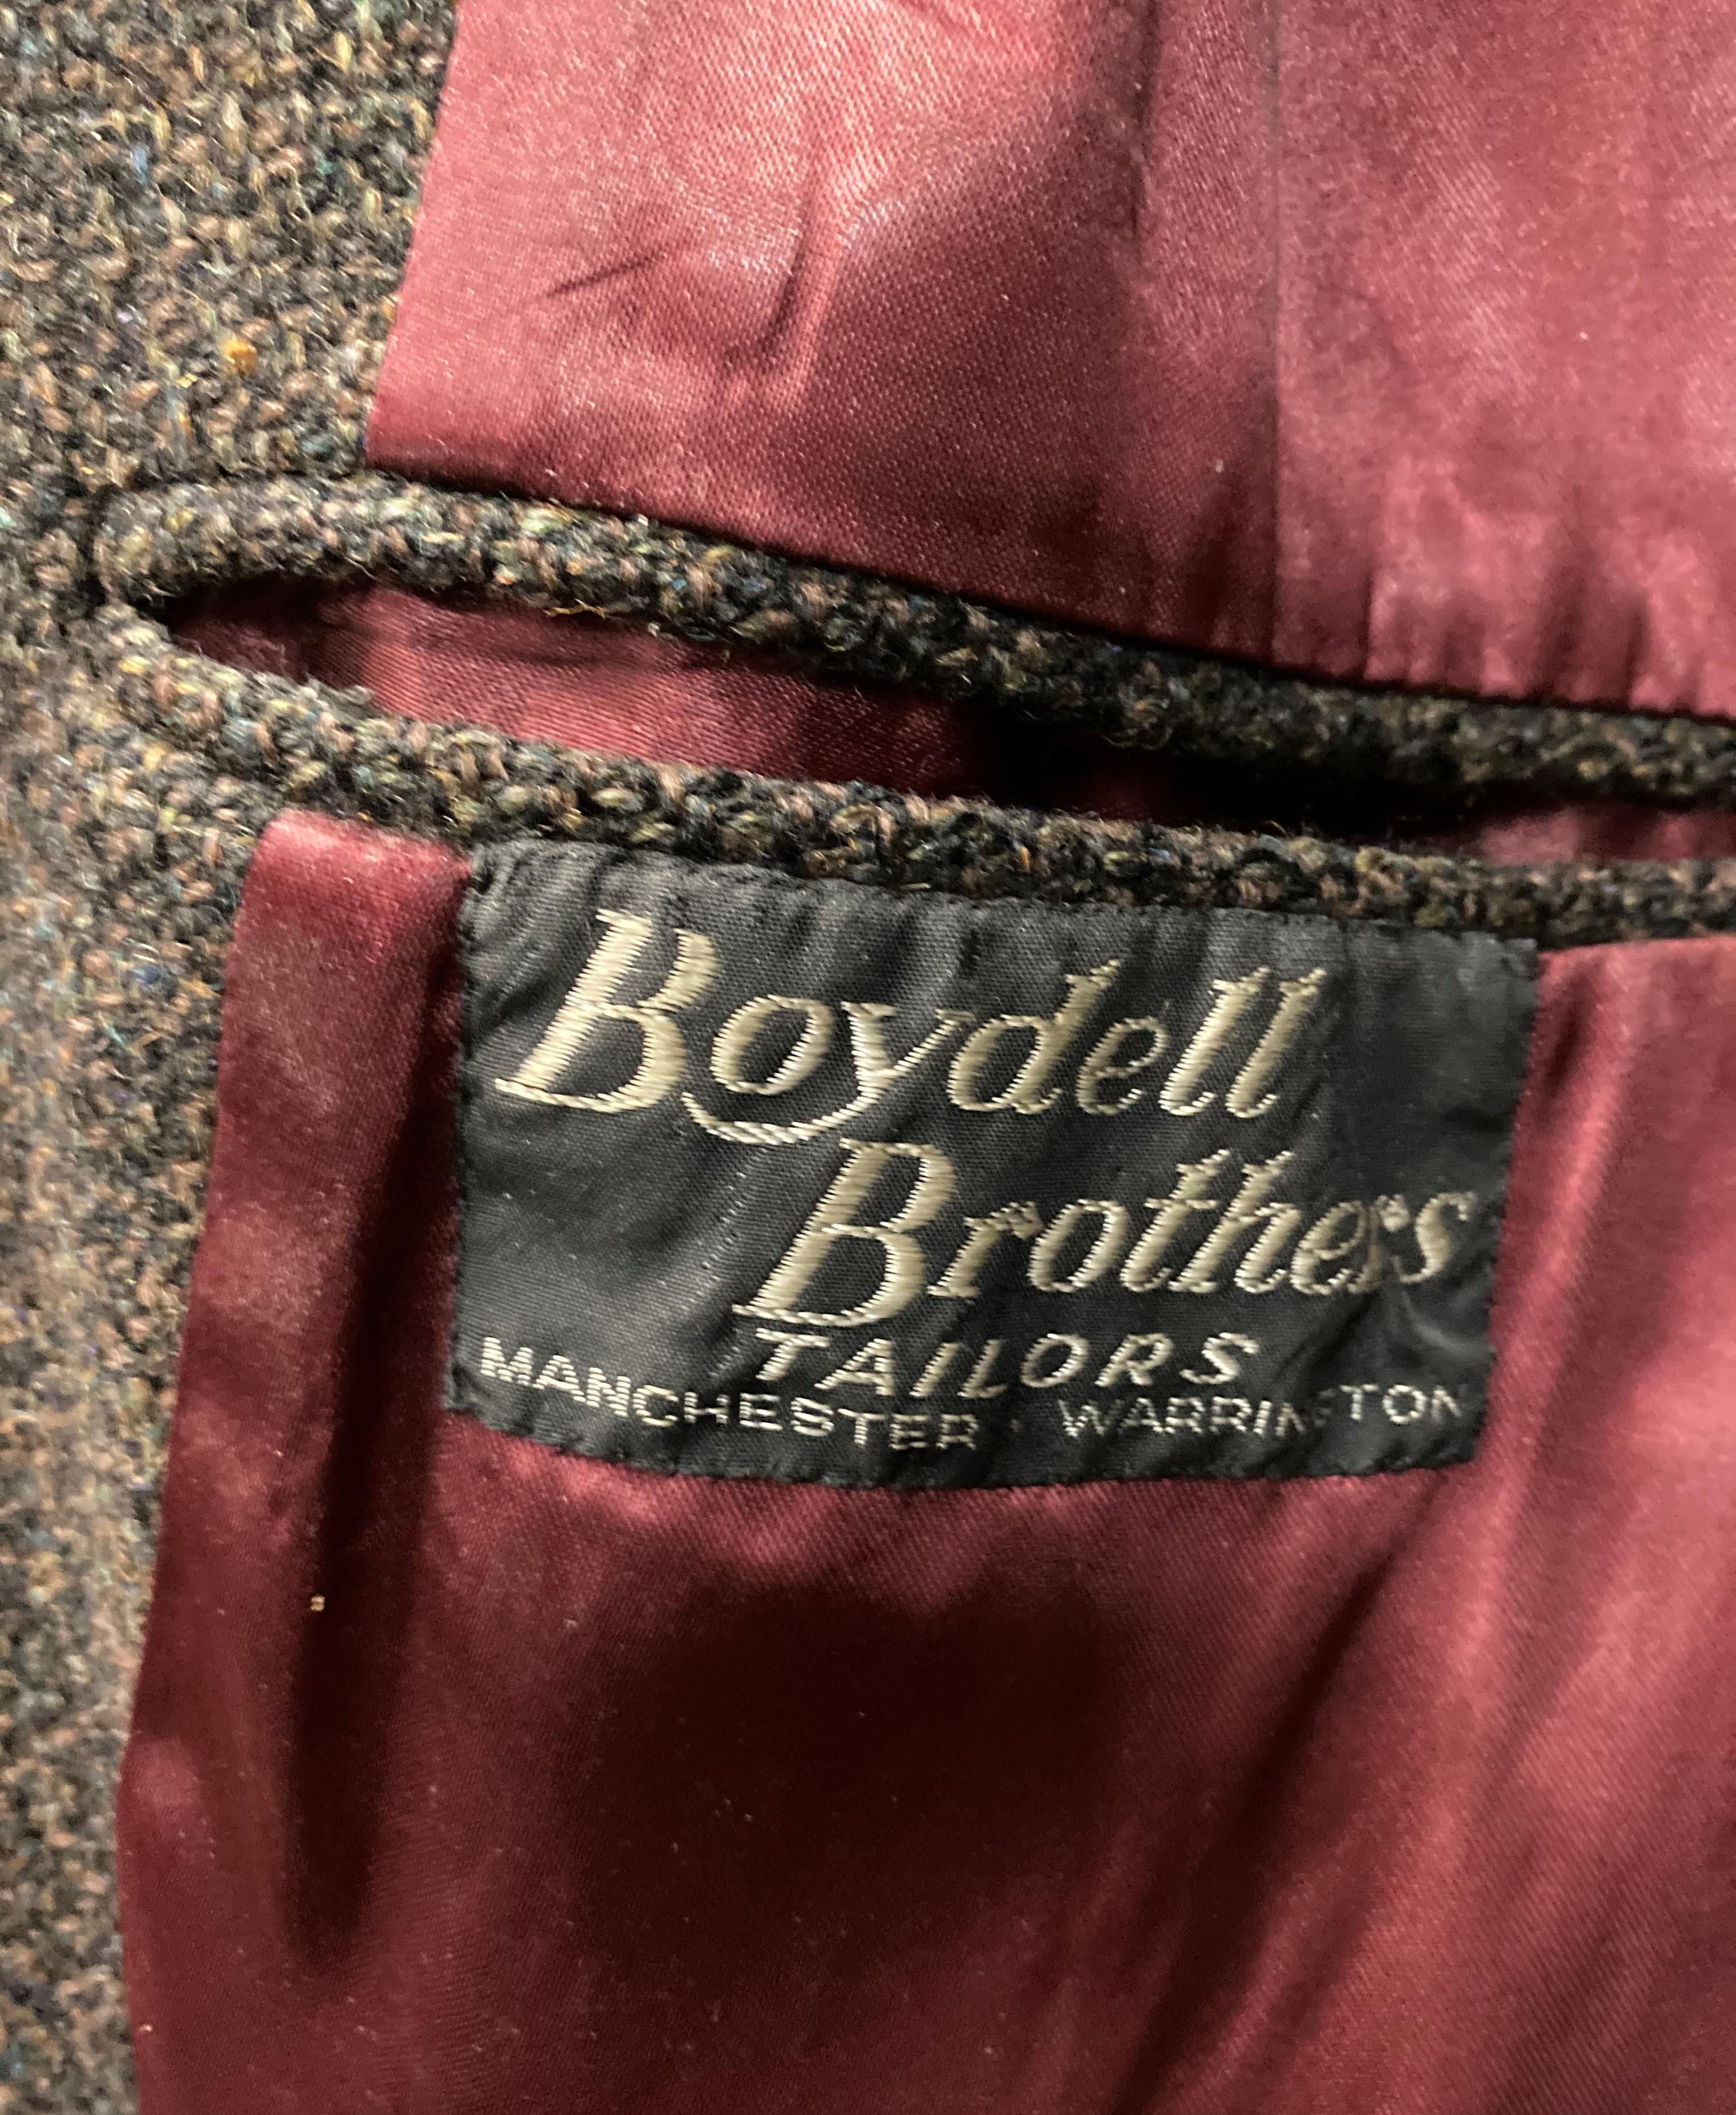 A Boydell Brothers Manchester & Warrington gentleman's brown wool overcoat, - Image 2 of 3